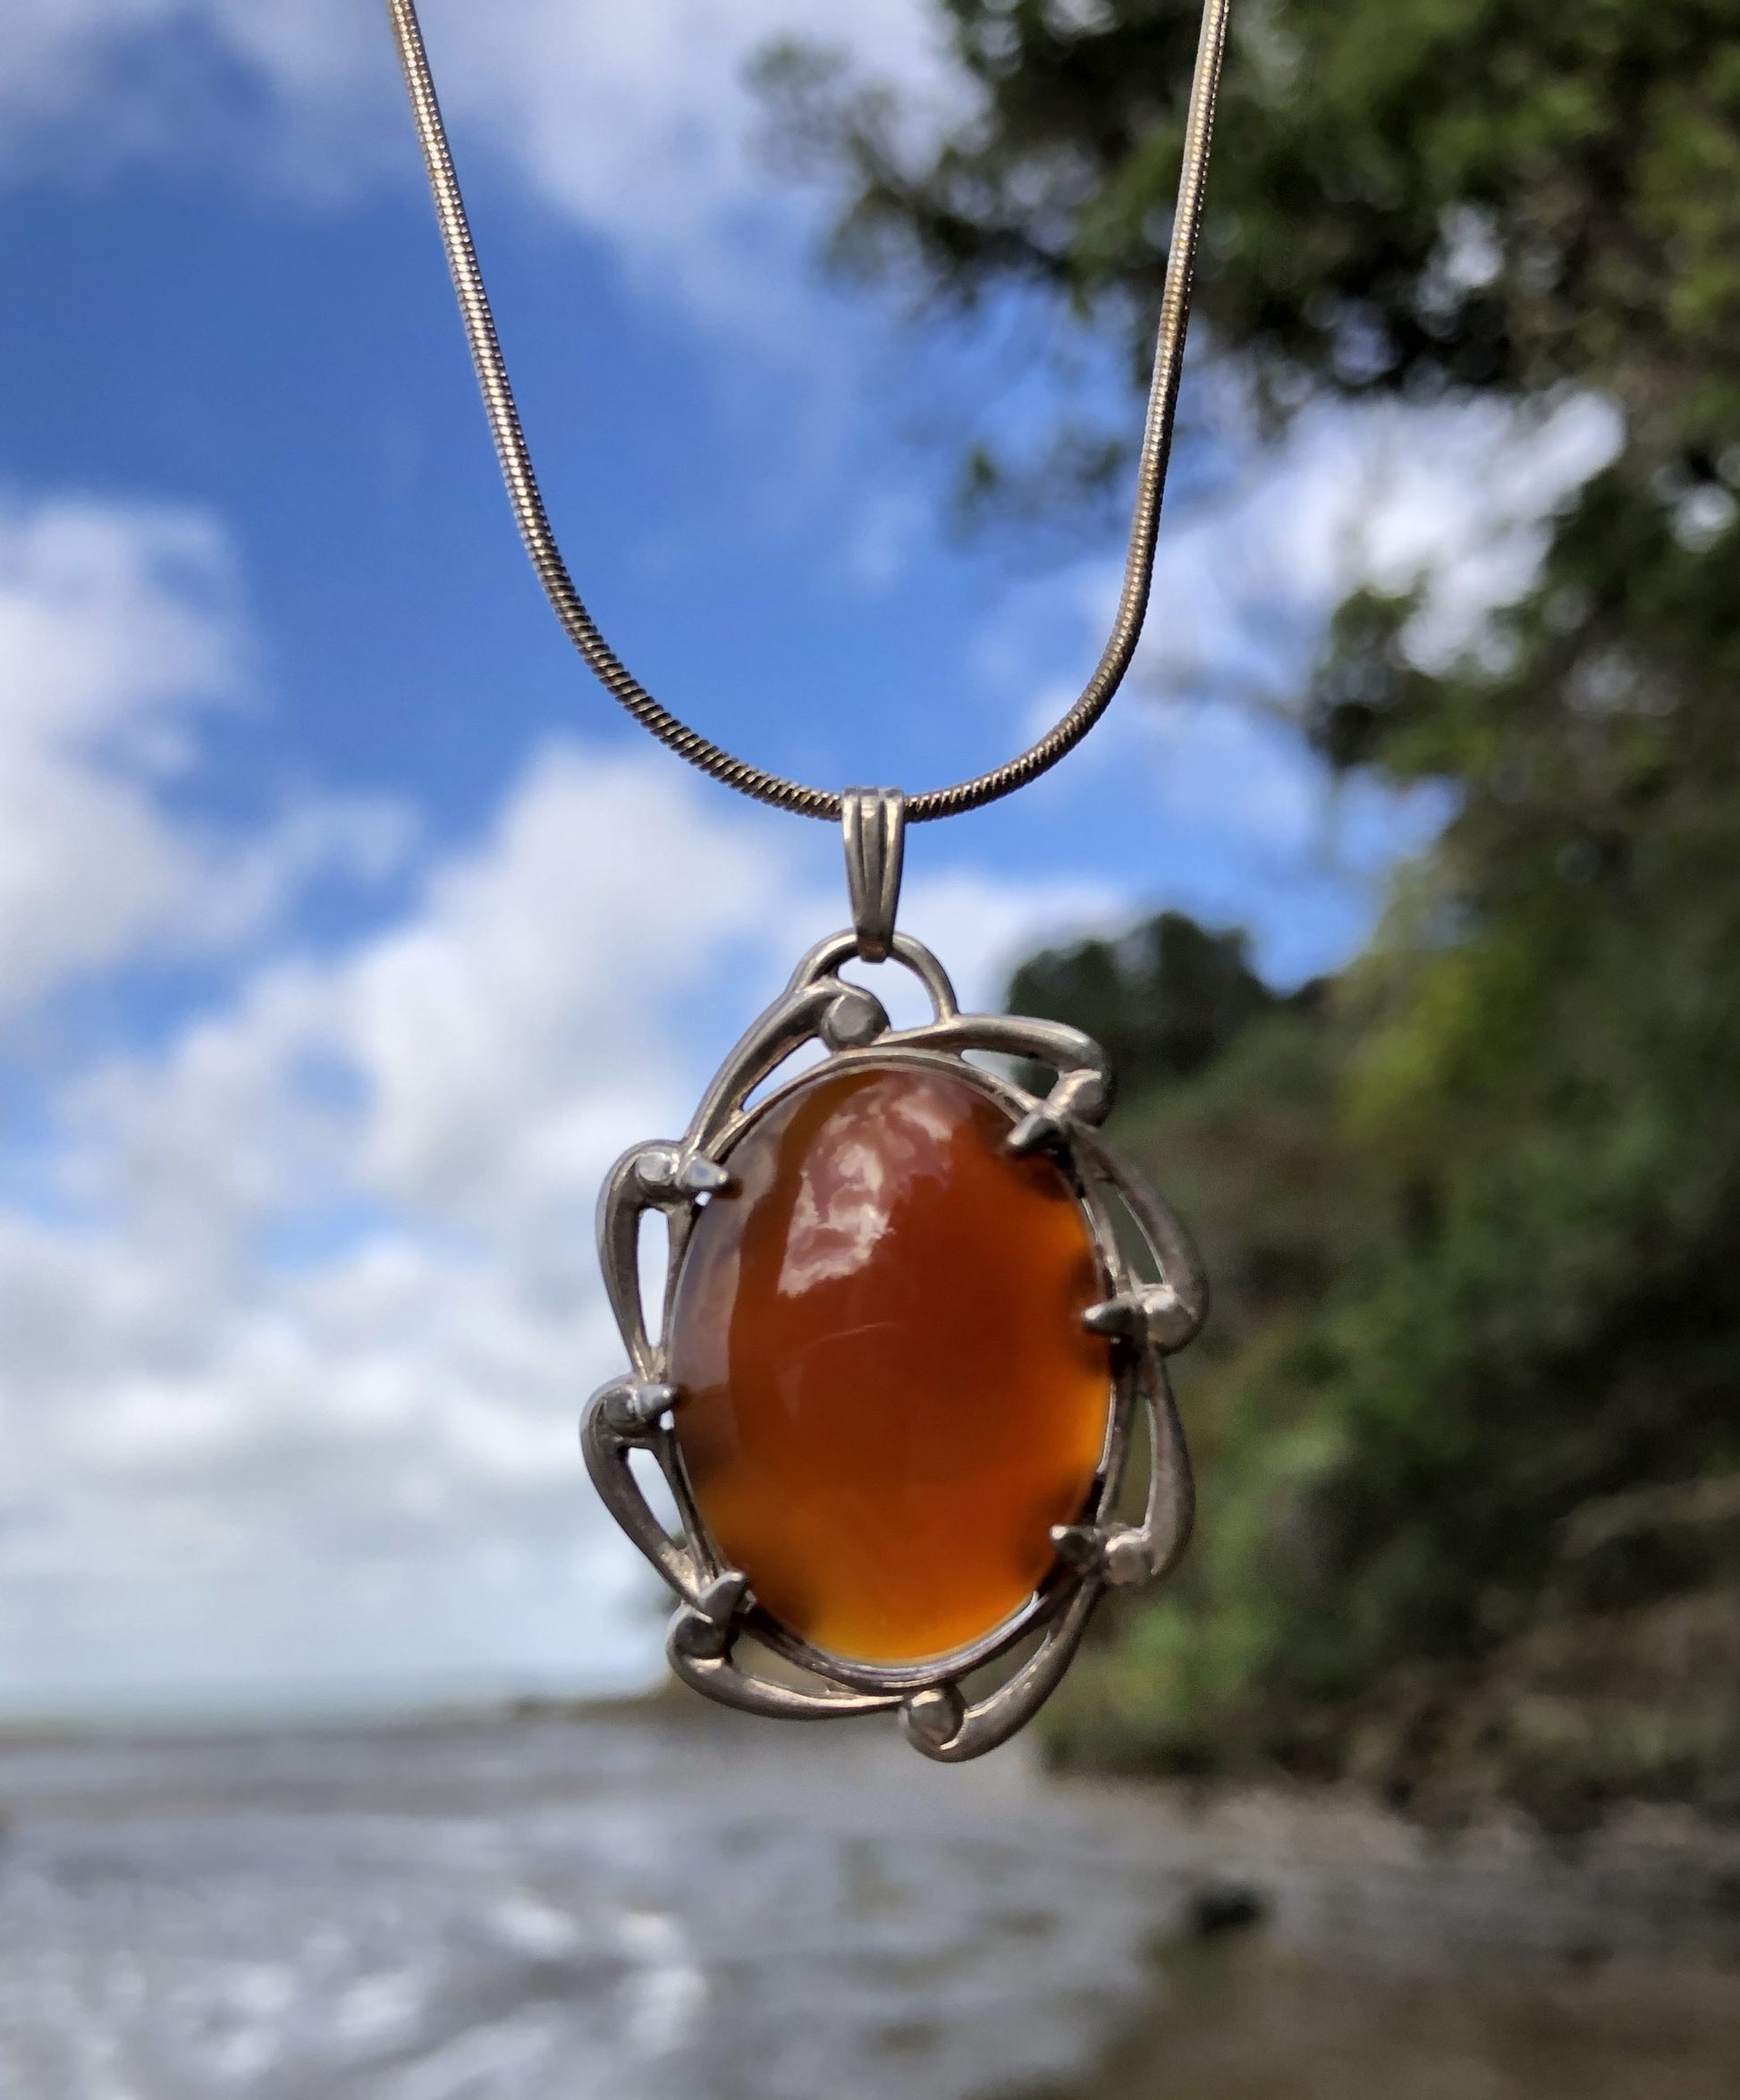 Necklace with a flawless caramel orange New Zealand Carnelian, hand polished to a 25x18mm cabochon and set in a sterling silver setting with a 20 inch sterling silver snake chain, front